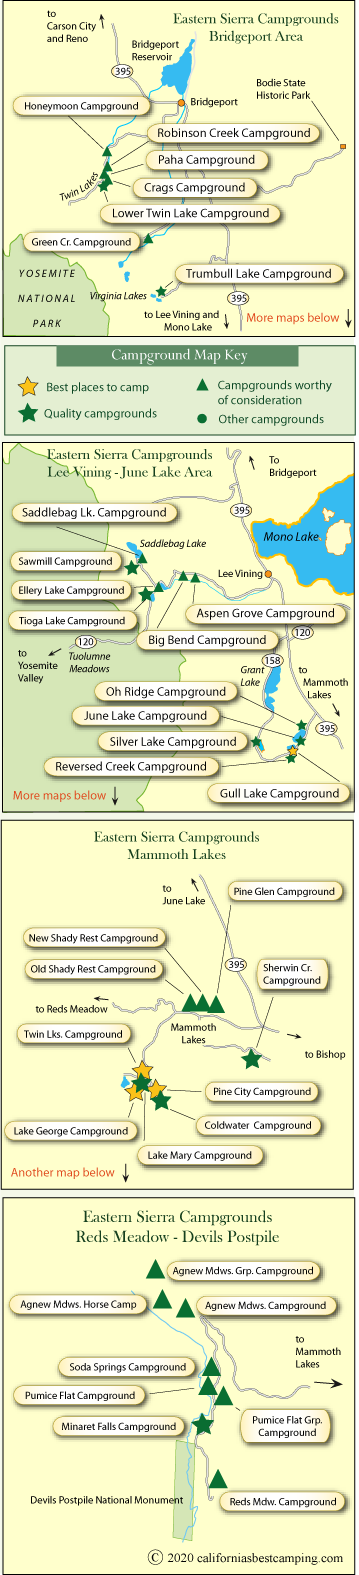 map of campgrounds in the Eastern Sierra from Bridgeport to Mammoth Lakes